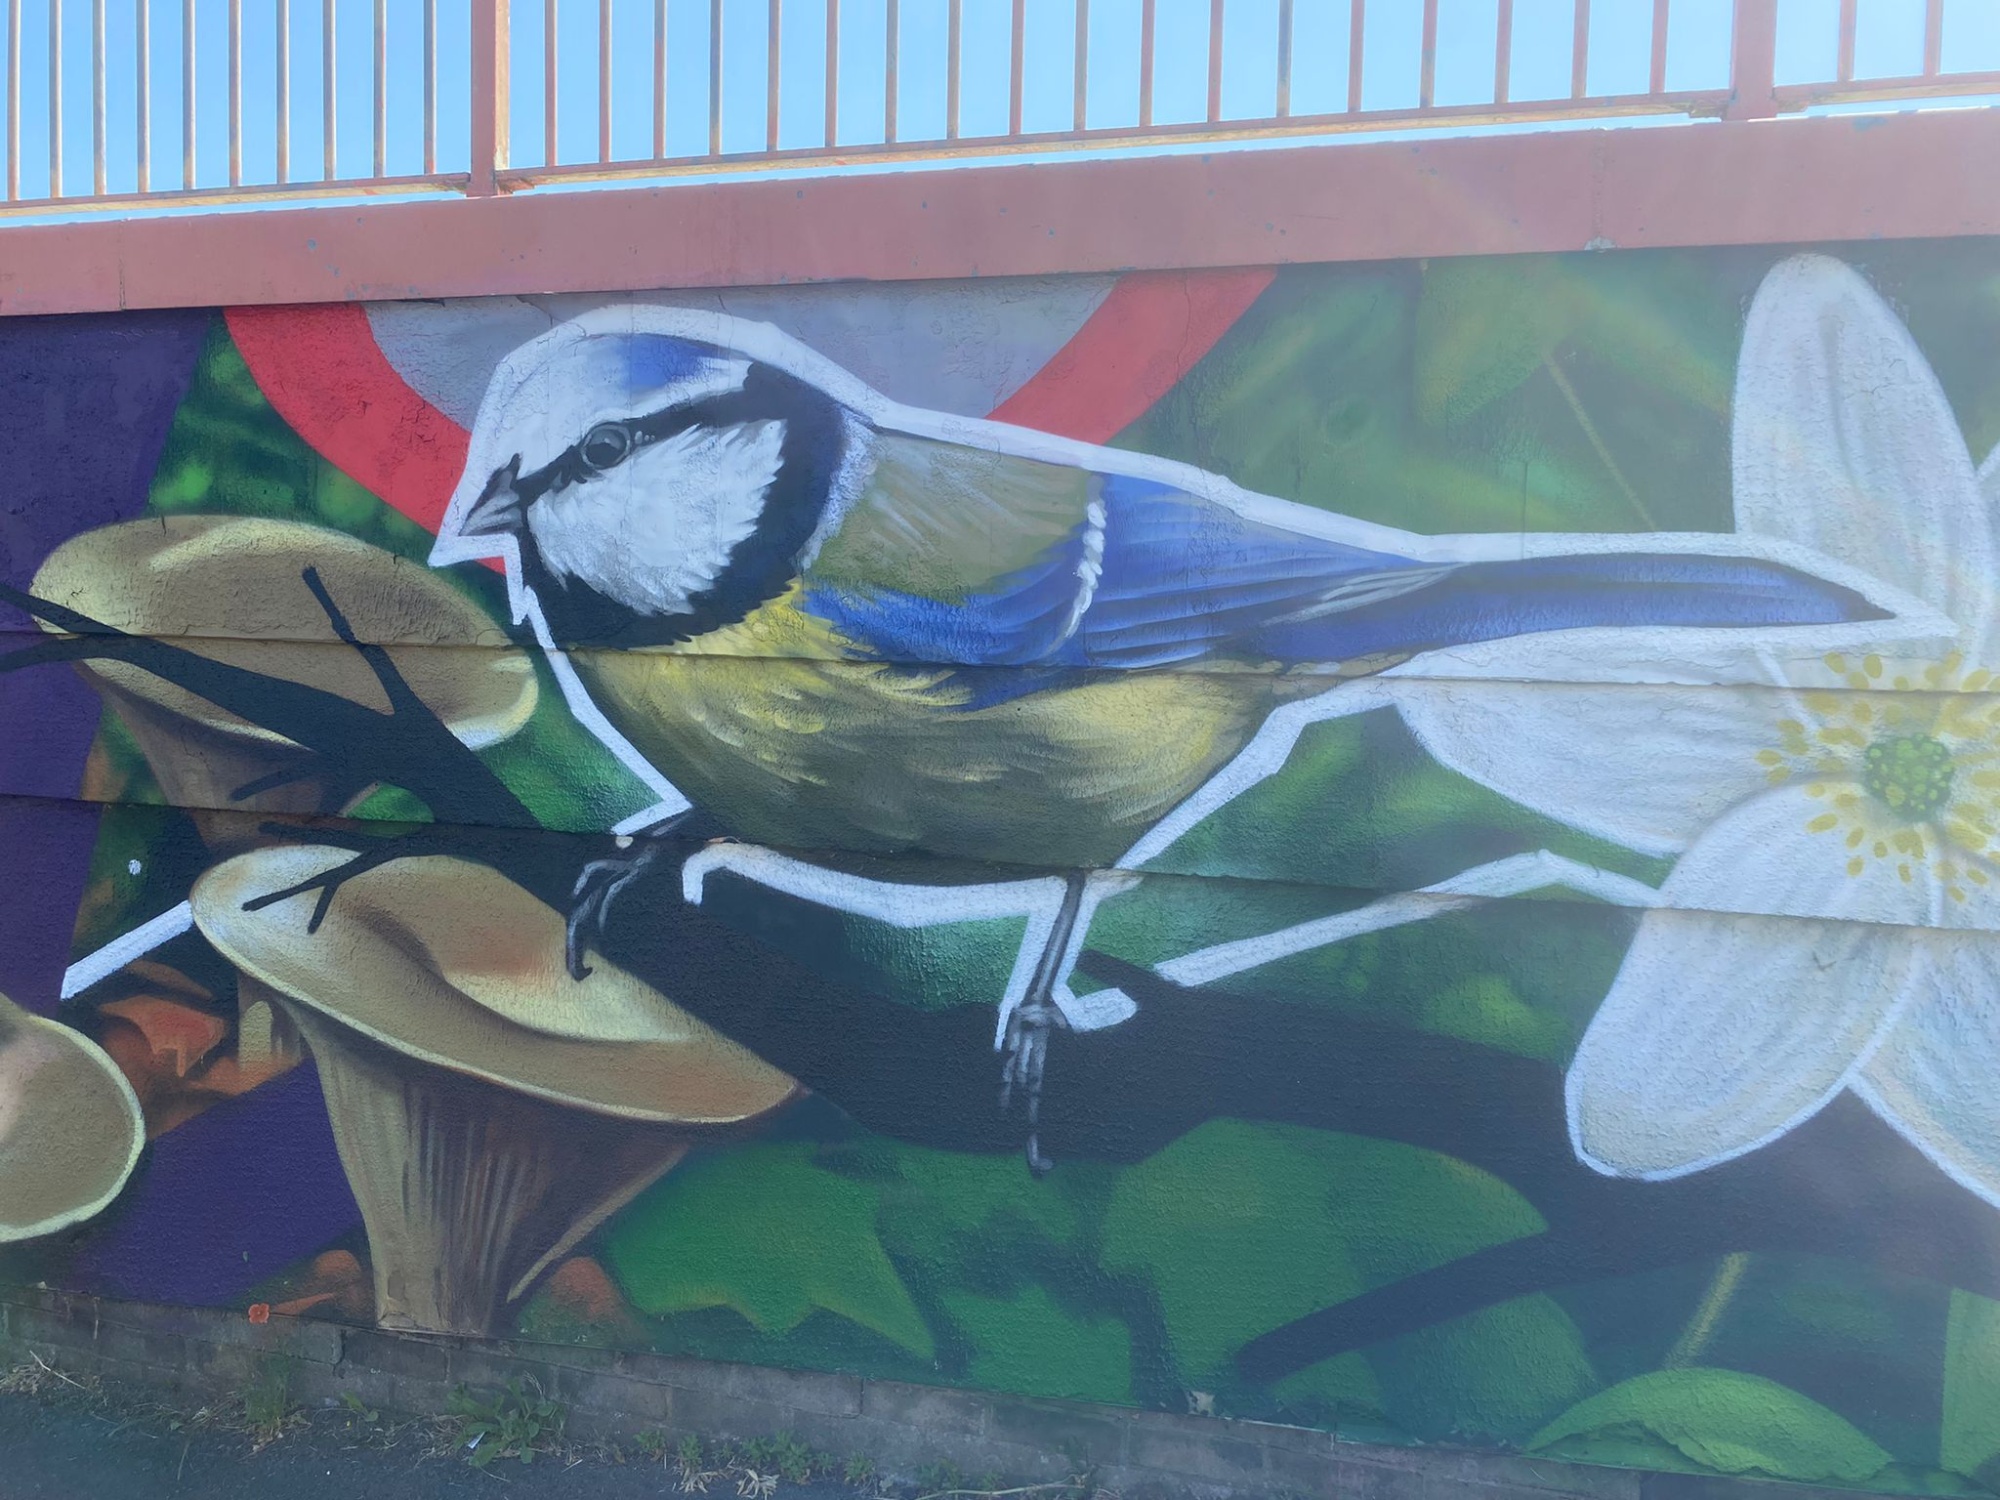 Vibrant and colourful birds form parts of the mural